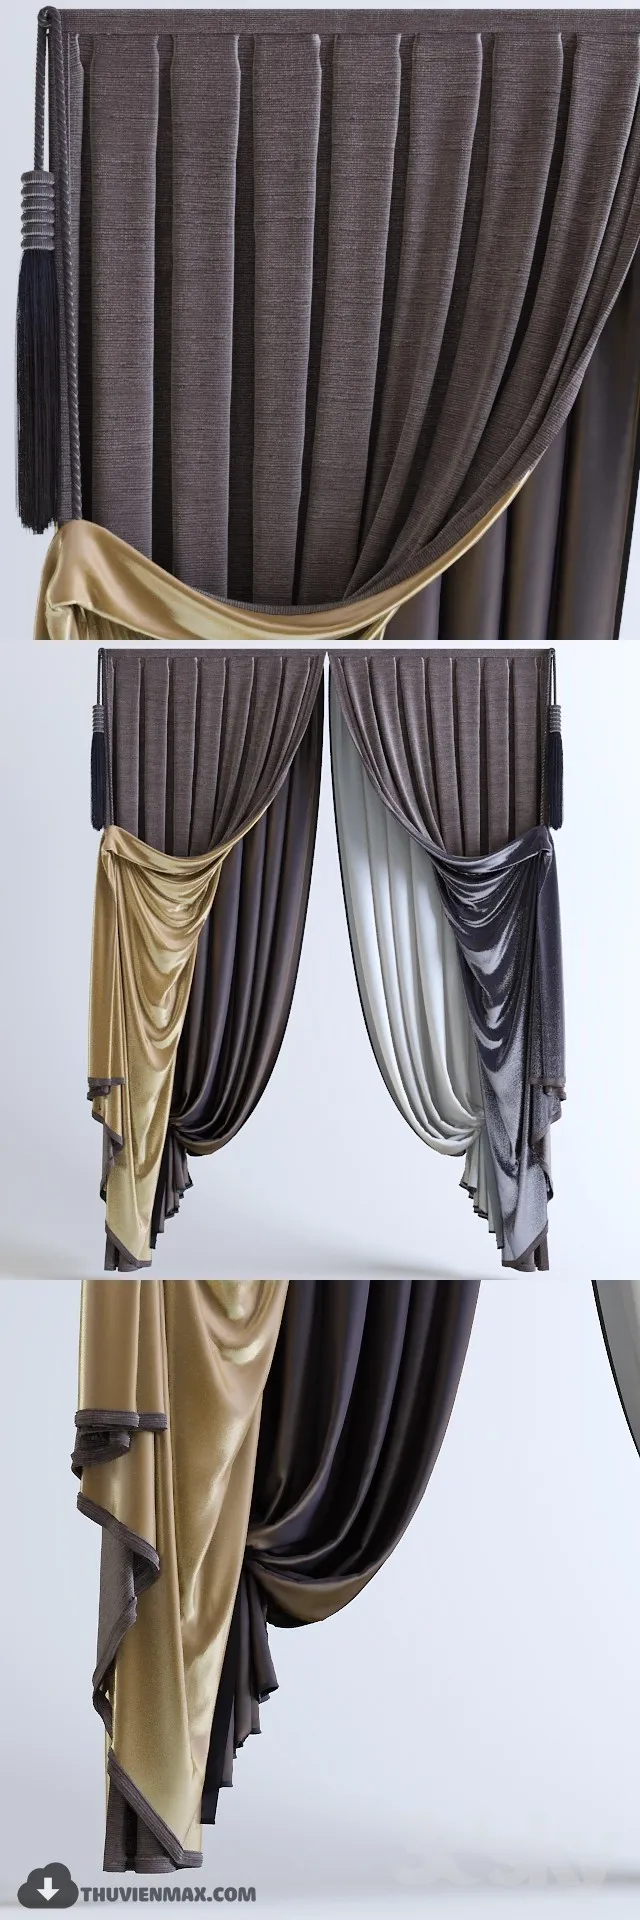 CURTAINS – WINDOW COVERS – 3D MODELS – 035